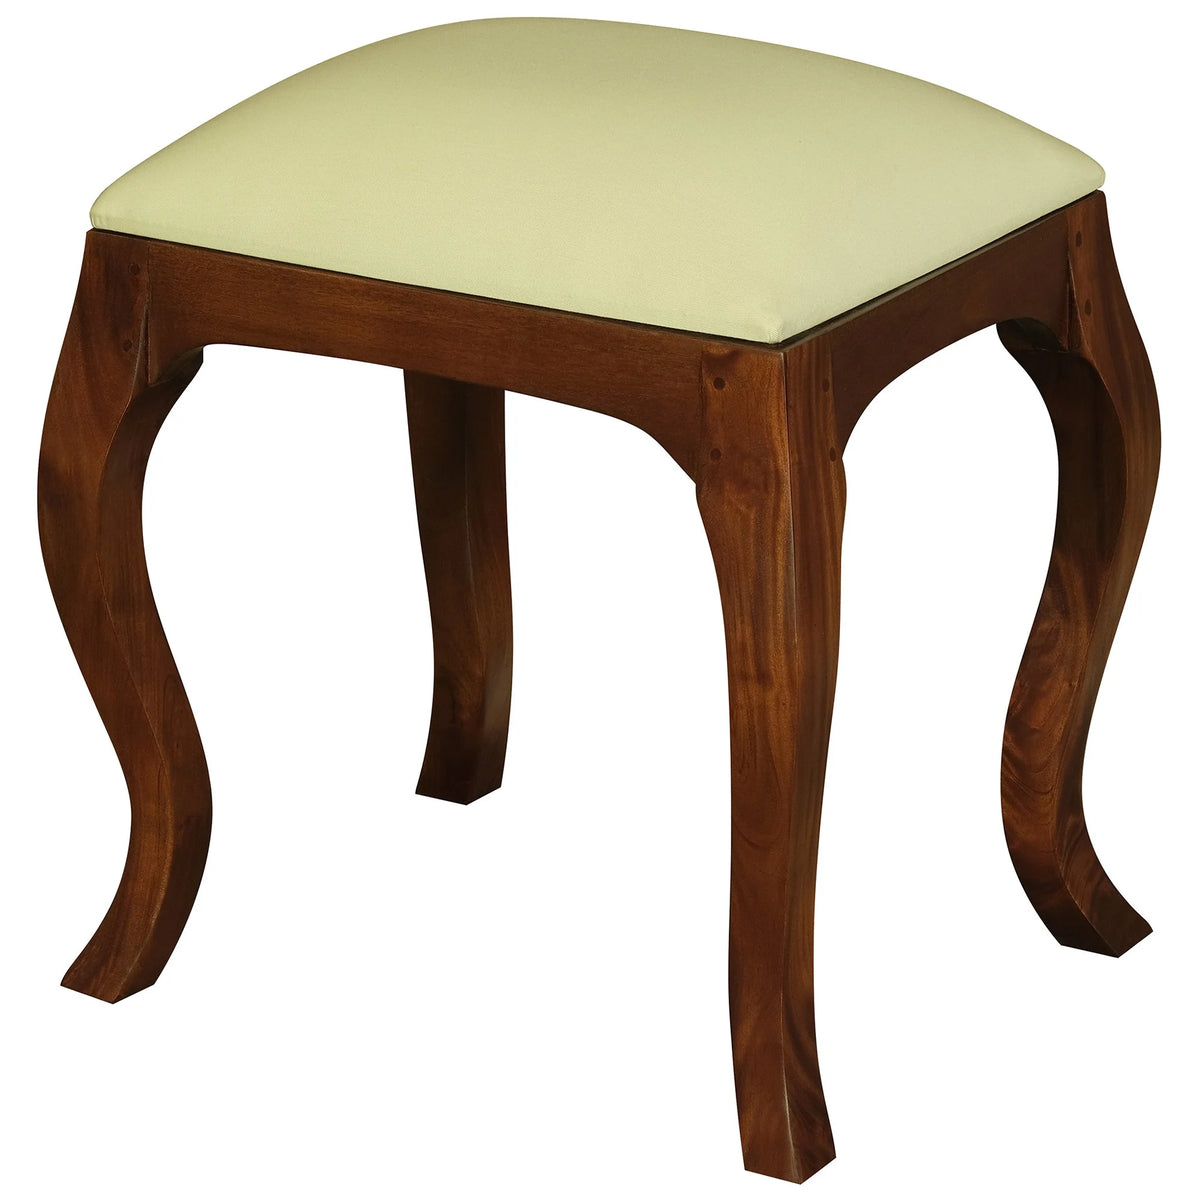 Queen Ann Solid Timber Dressing Stool - Mahogany